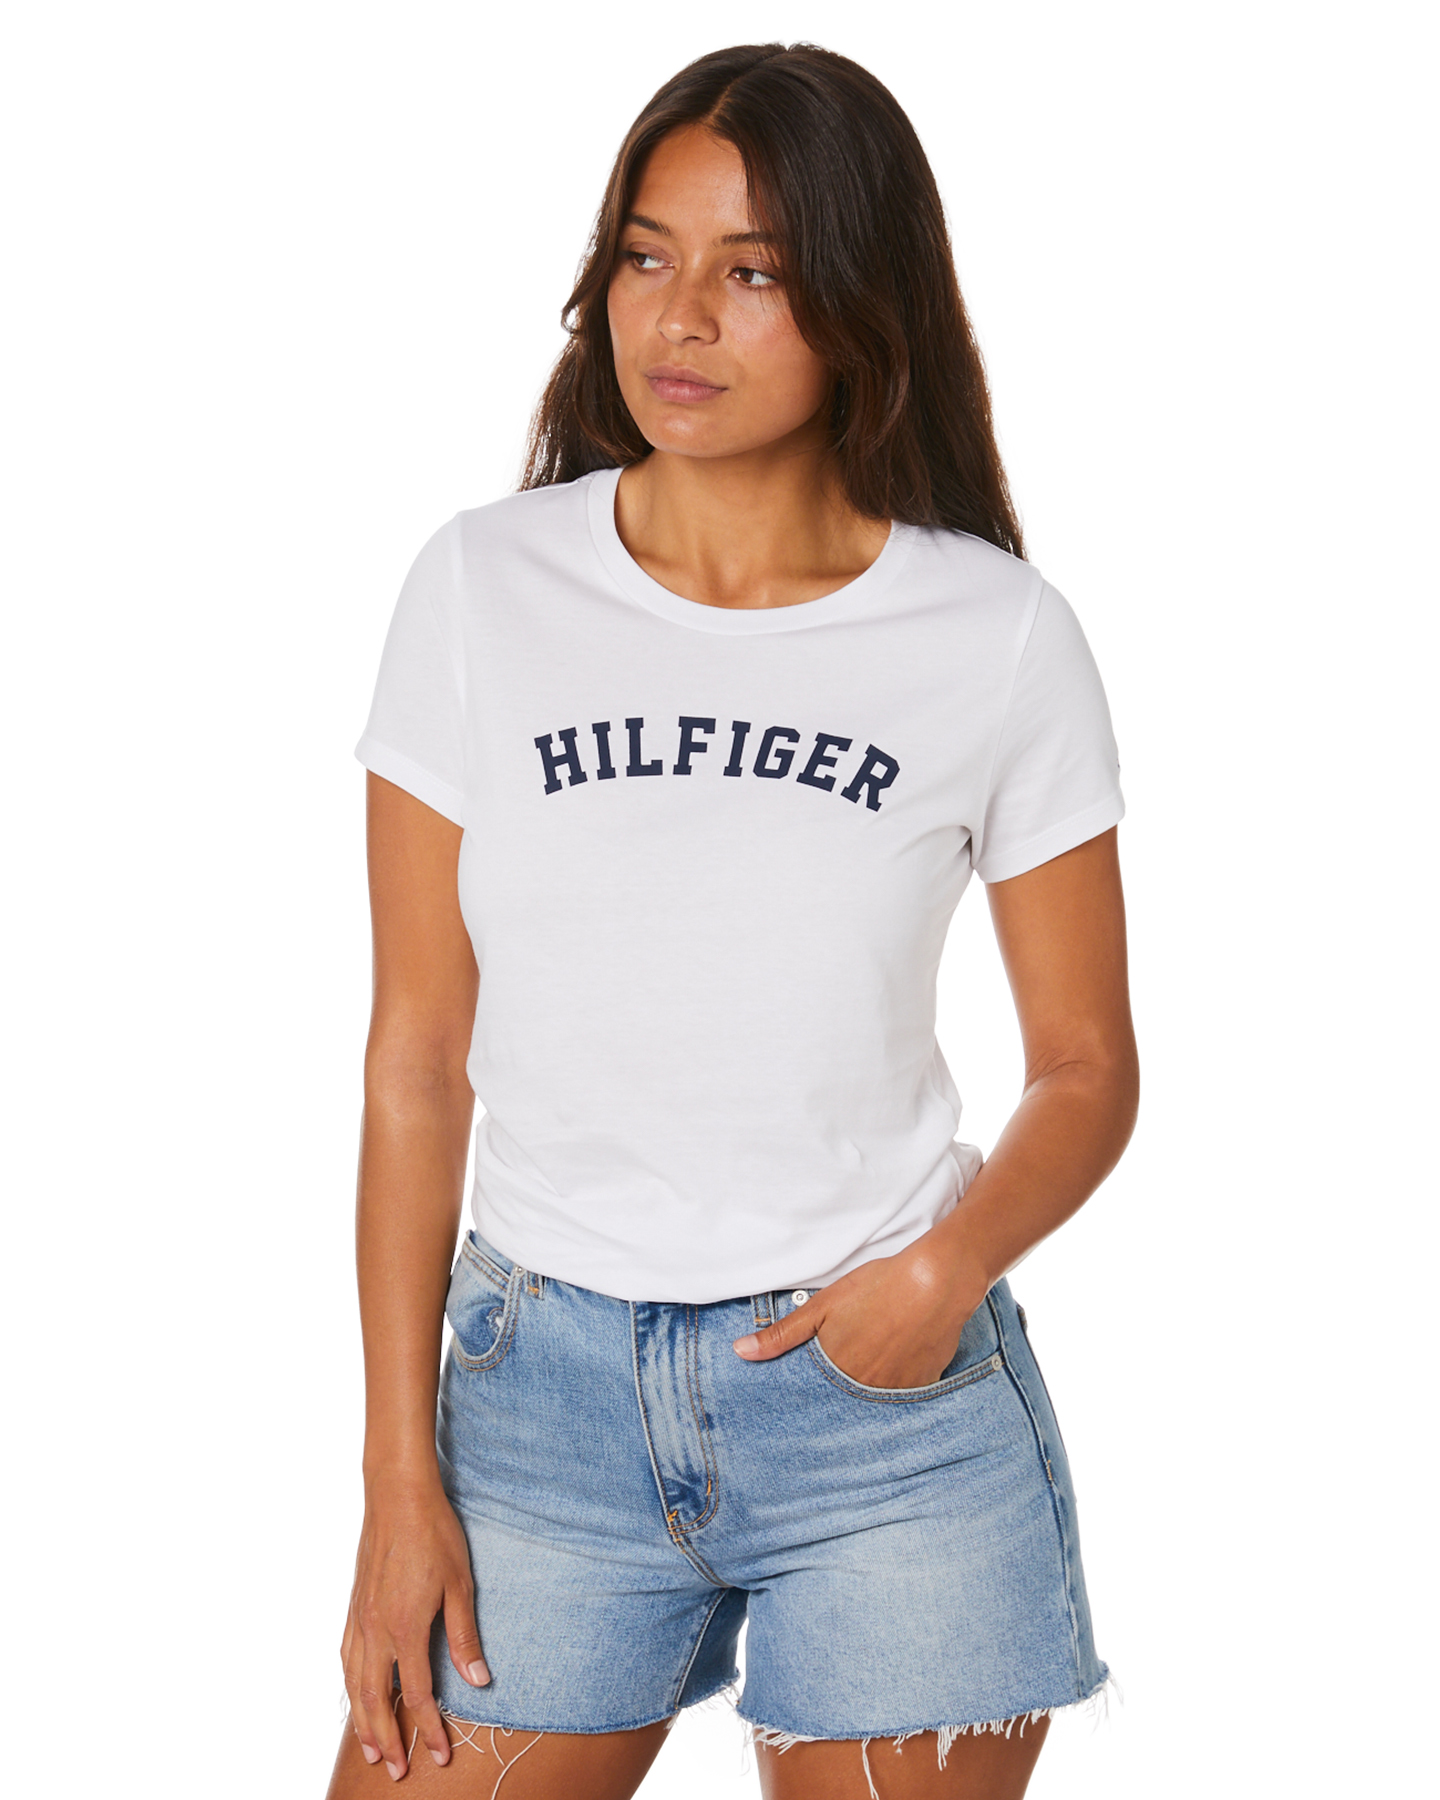 tommy hilfiger tee womens